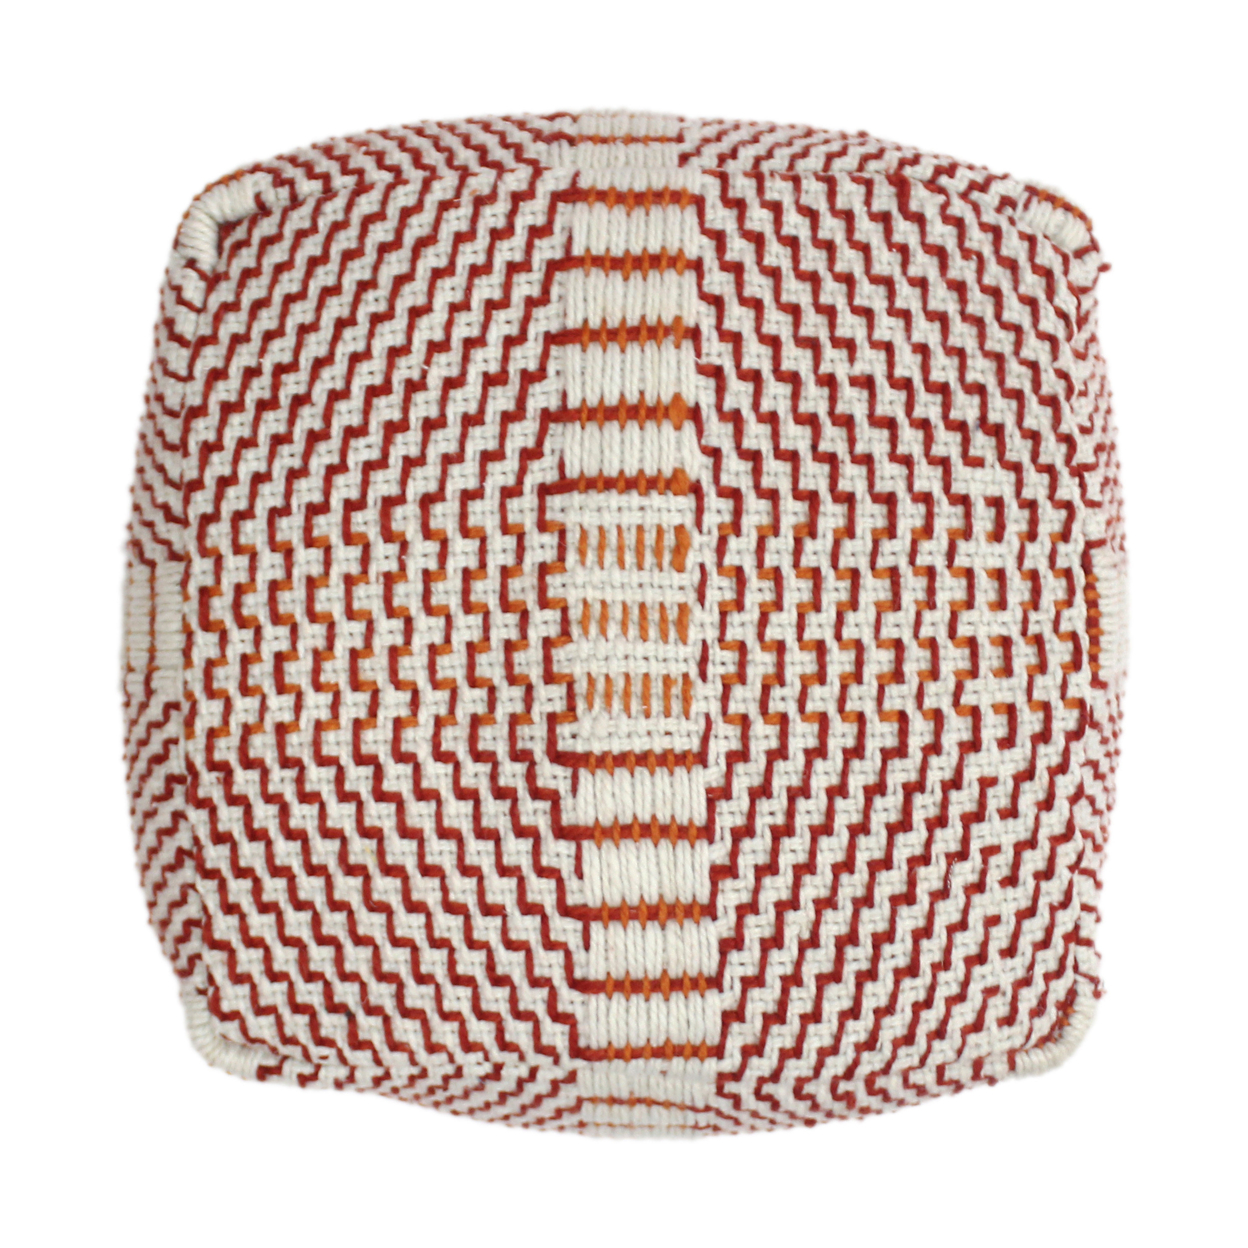 Dexter Bay Outdoor Handcrafted Boho Water Resistant Cube Pouf, Red and Orange - image 5 of 5